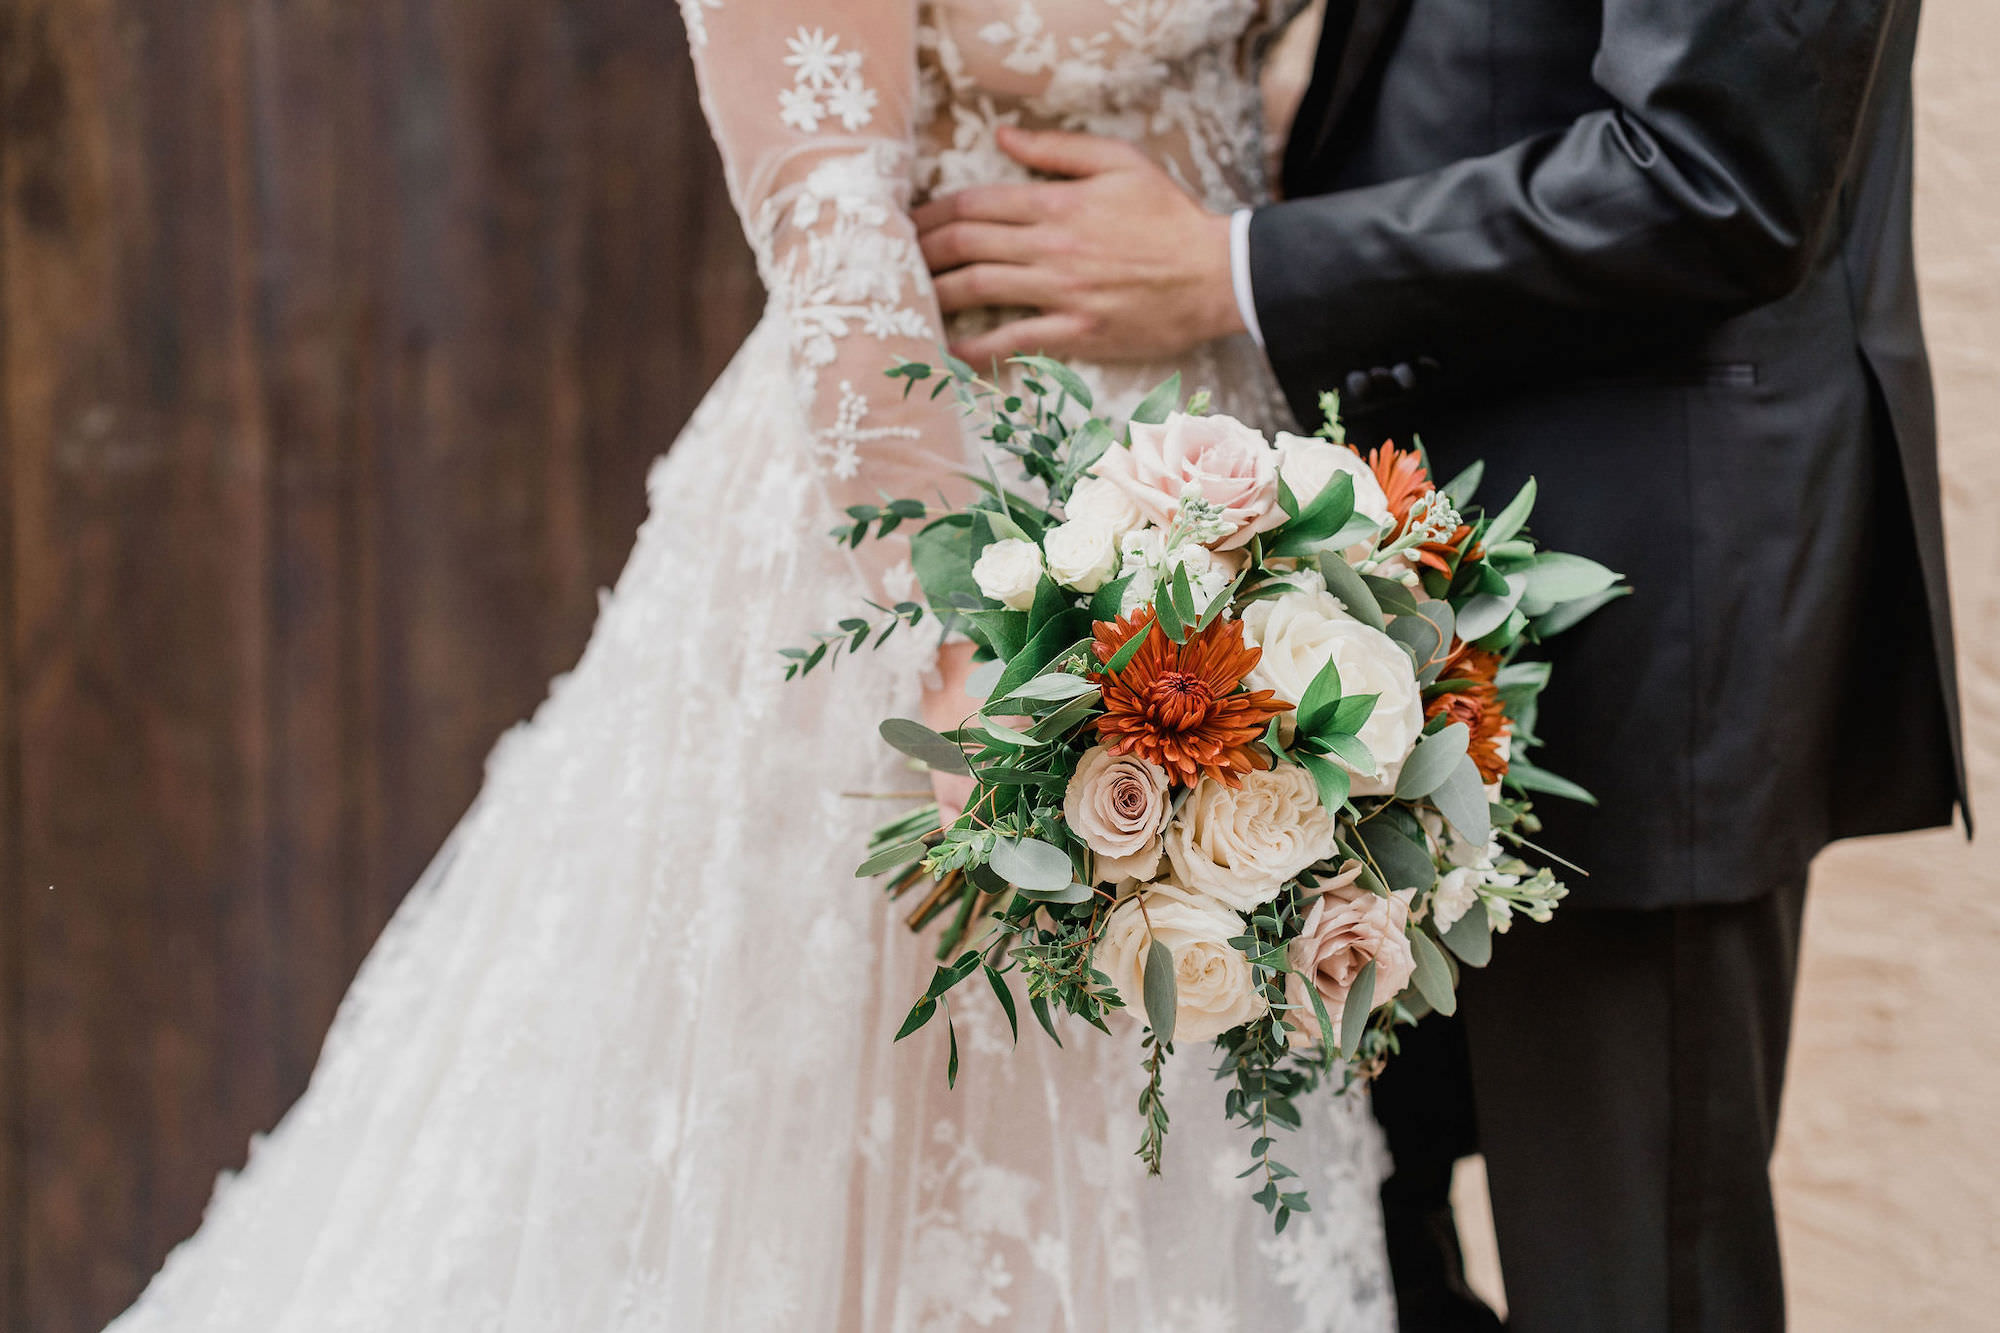 White and Pink Roses, Orange Chrysanthemum, Ruscus, and Eucalyptus Bridal Wedding Bouquet Ideas | Sarasota Florist Monarch Events and Design